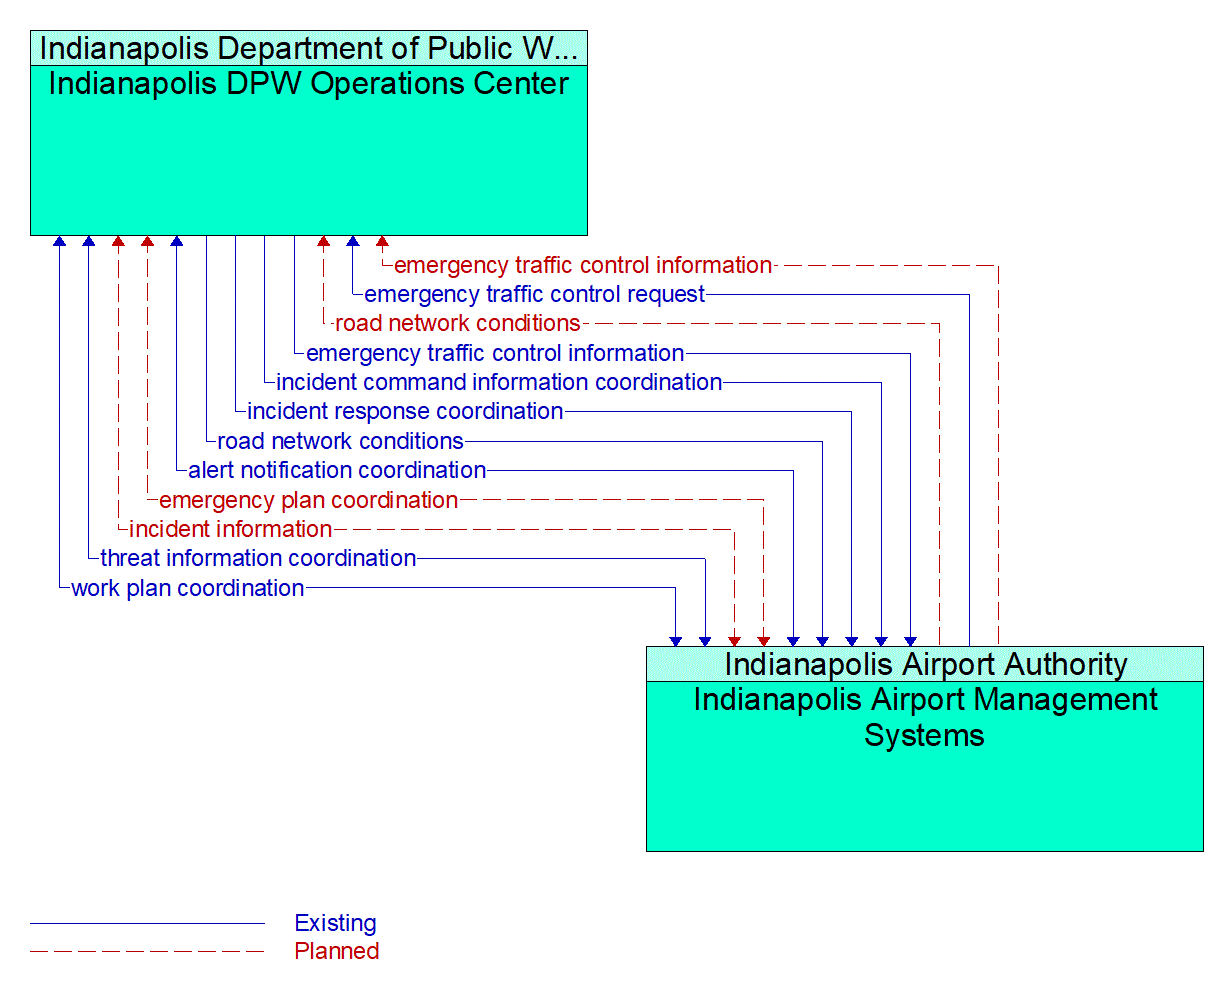 Architecture Flow Diagram: Indianapolis Airport Management Systems <--> Indianapolis DPW Operations Center